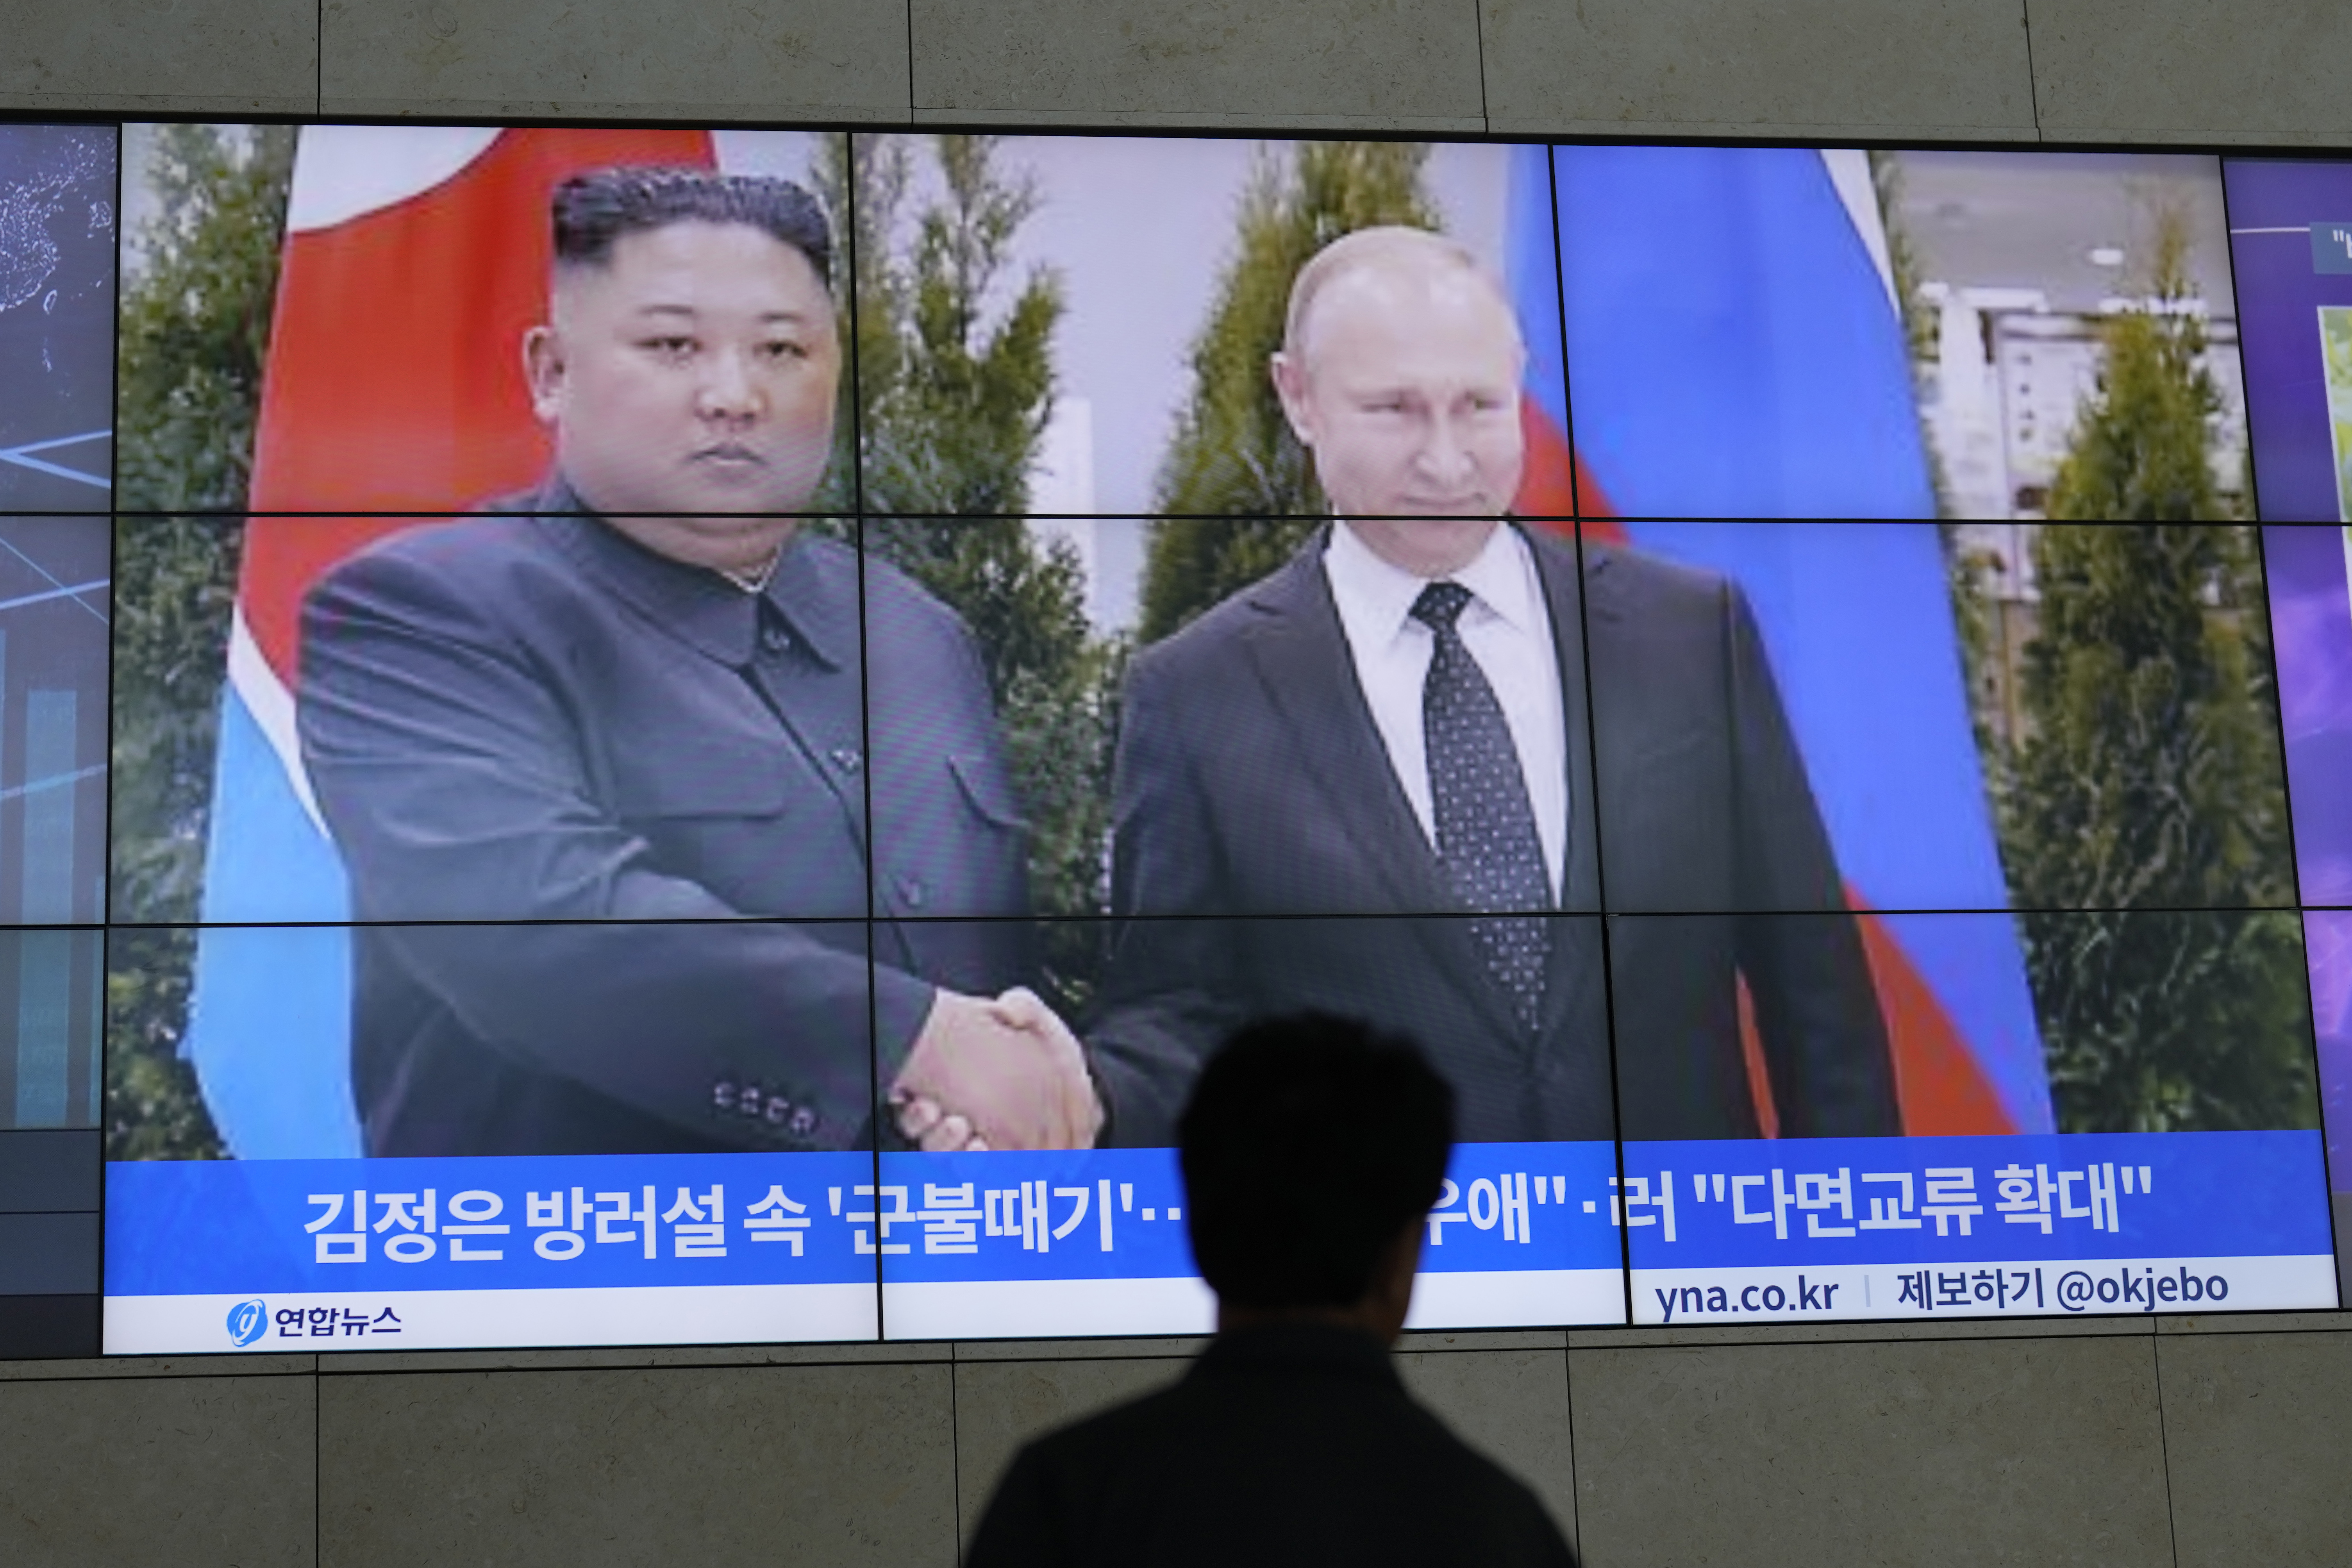 Opinion: Russia-North Korea summit unnerves West by uncertainty of agenda